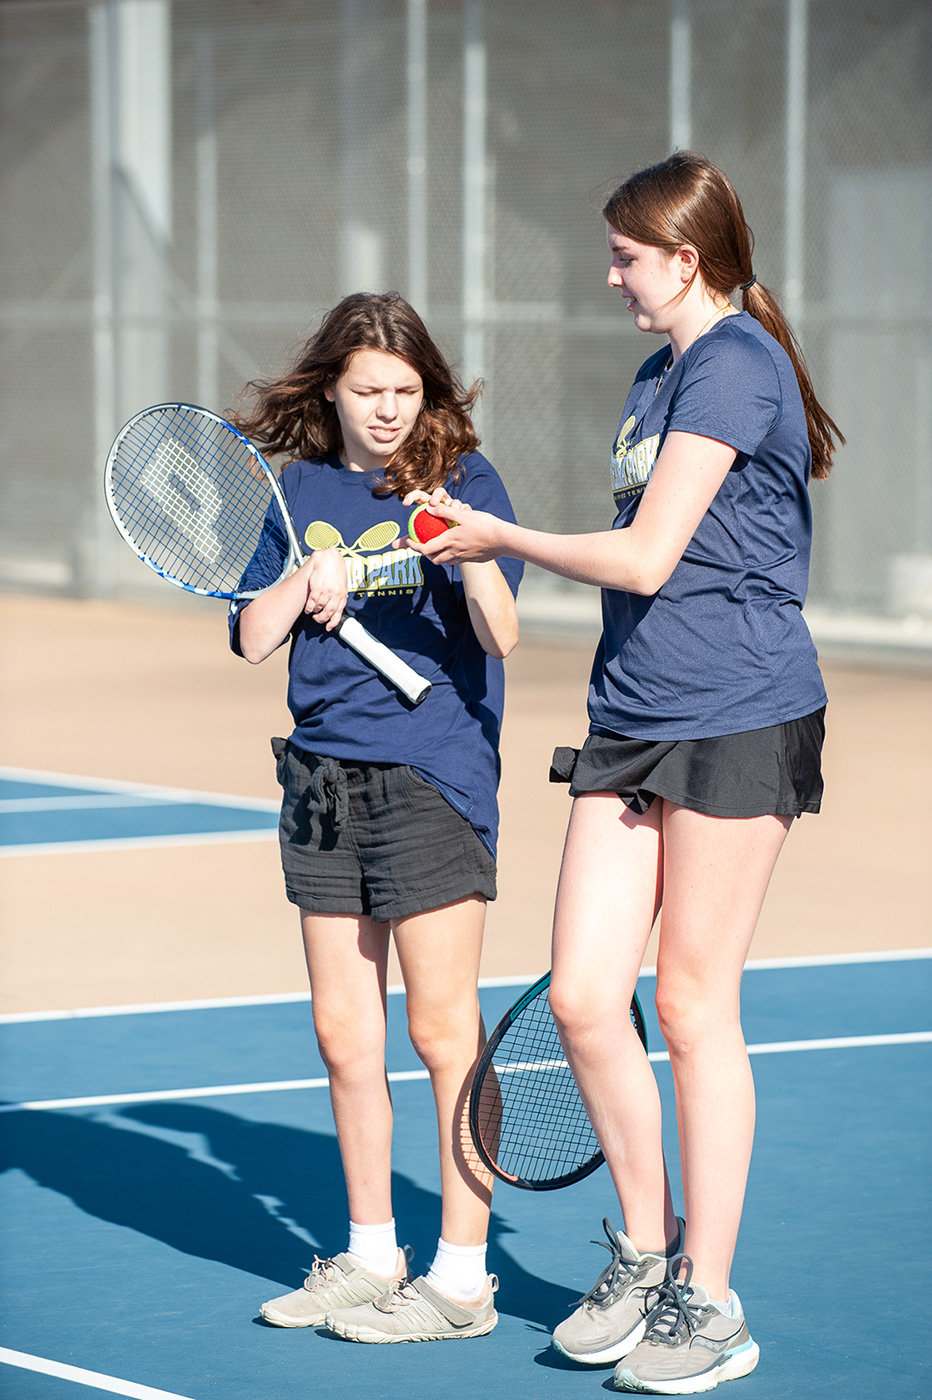 Three schools competed in unified tennis practices at Severna Park High School during the fall.